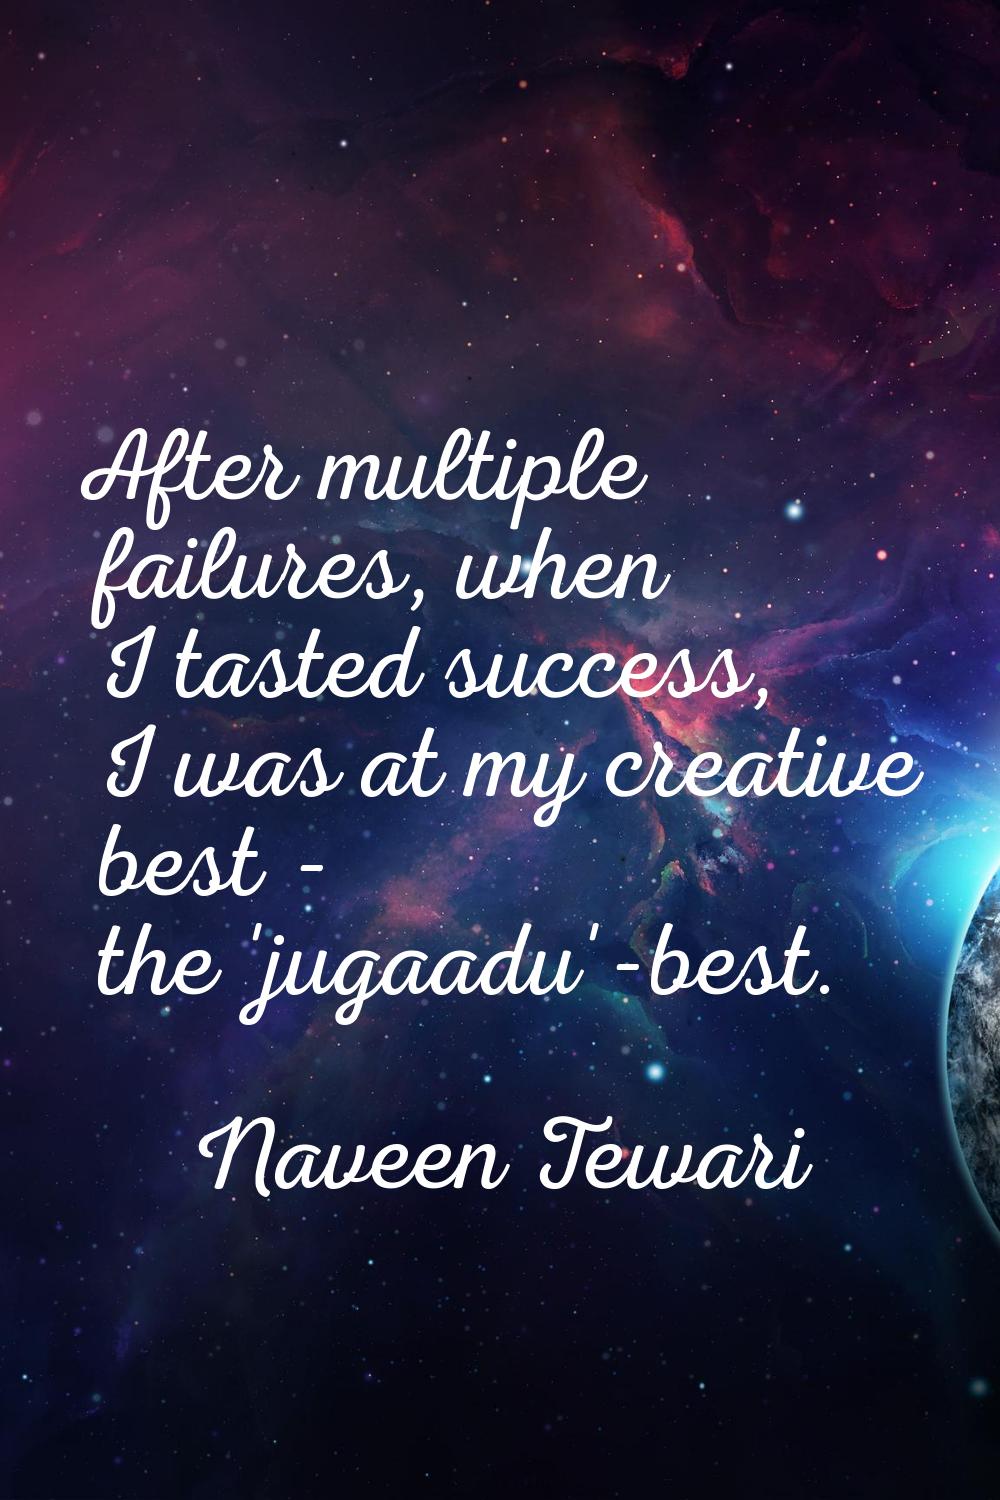 After multiple failures, when I tasted success, I was at my creative best - the 'jugaadu'-best.